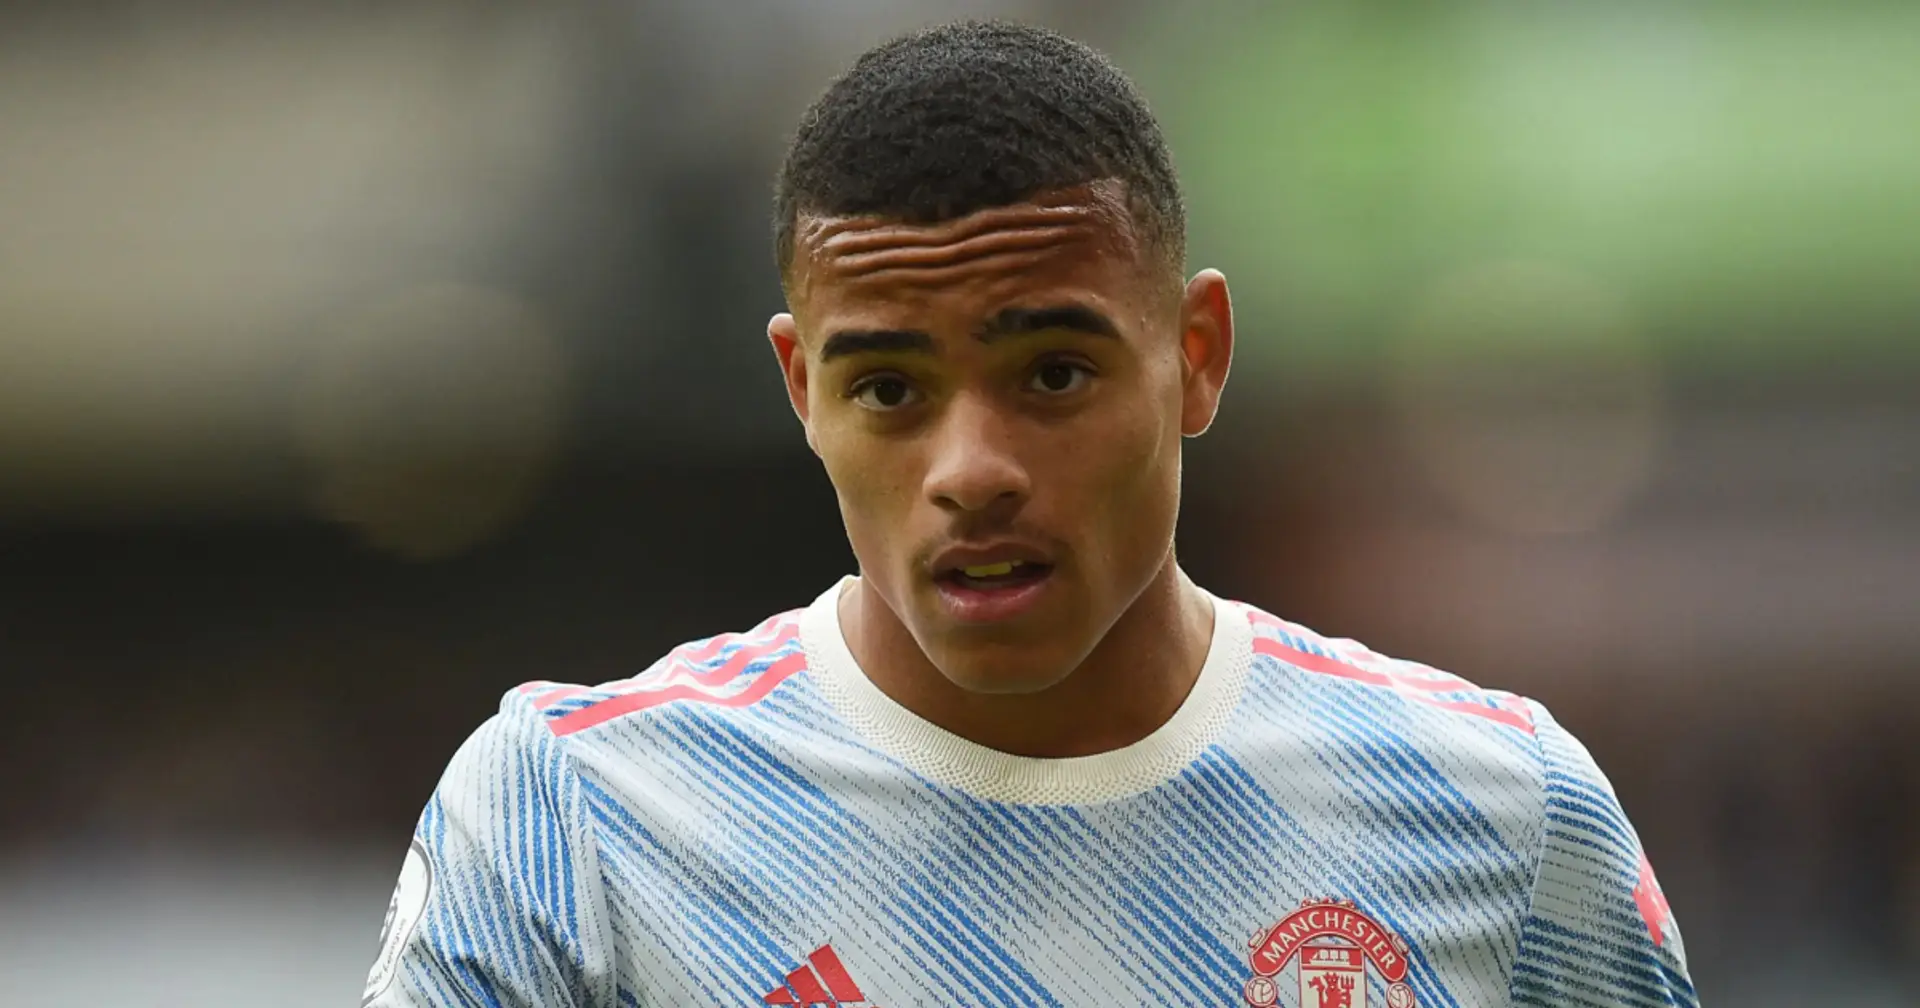 Greenwood unlikely to play for Man United again & 2 more under-radar stories